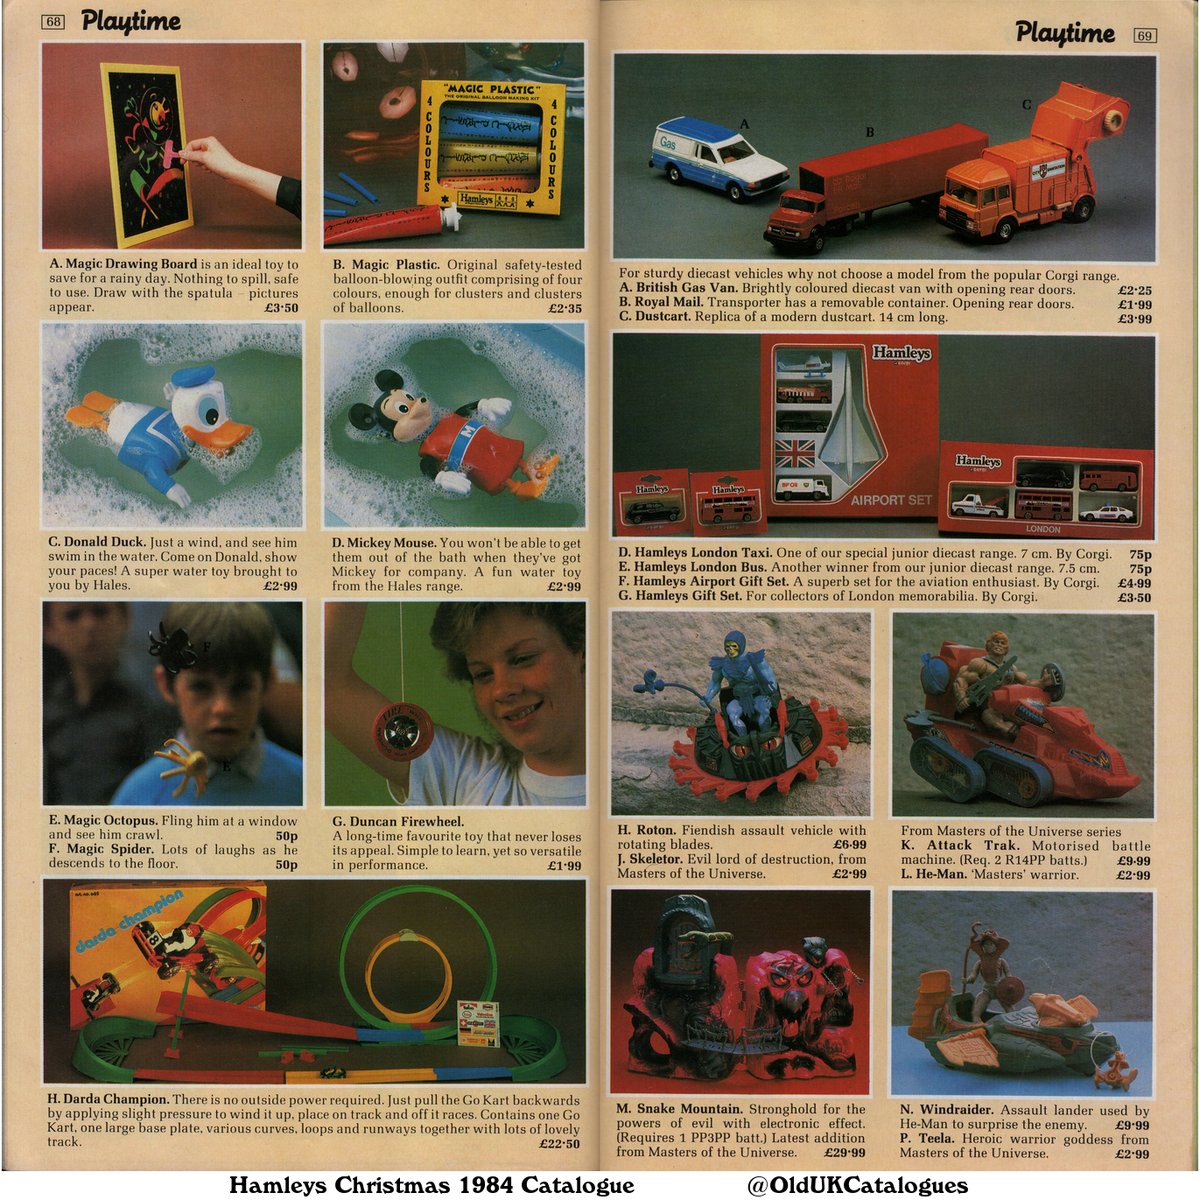 Vintage Hamleys Catalogue pages from Christmas 1984.